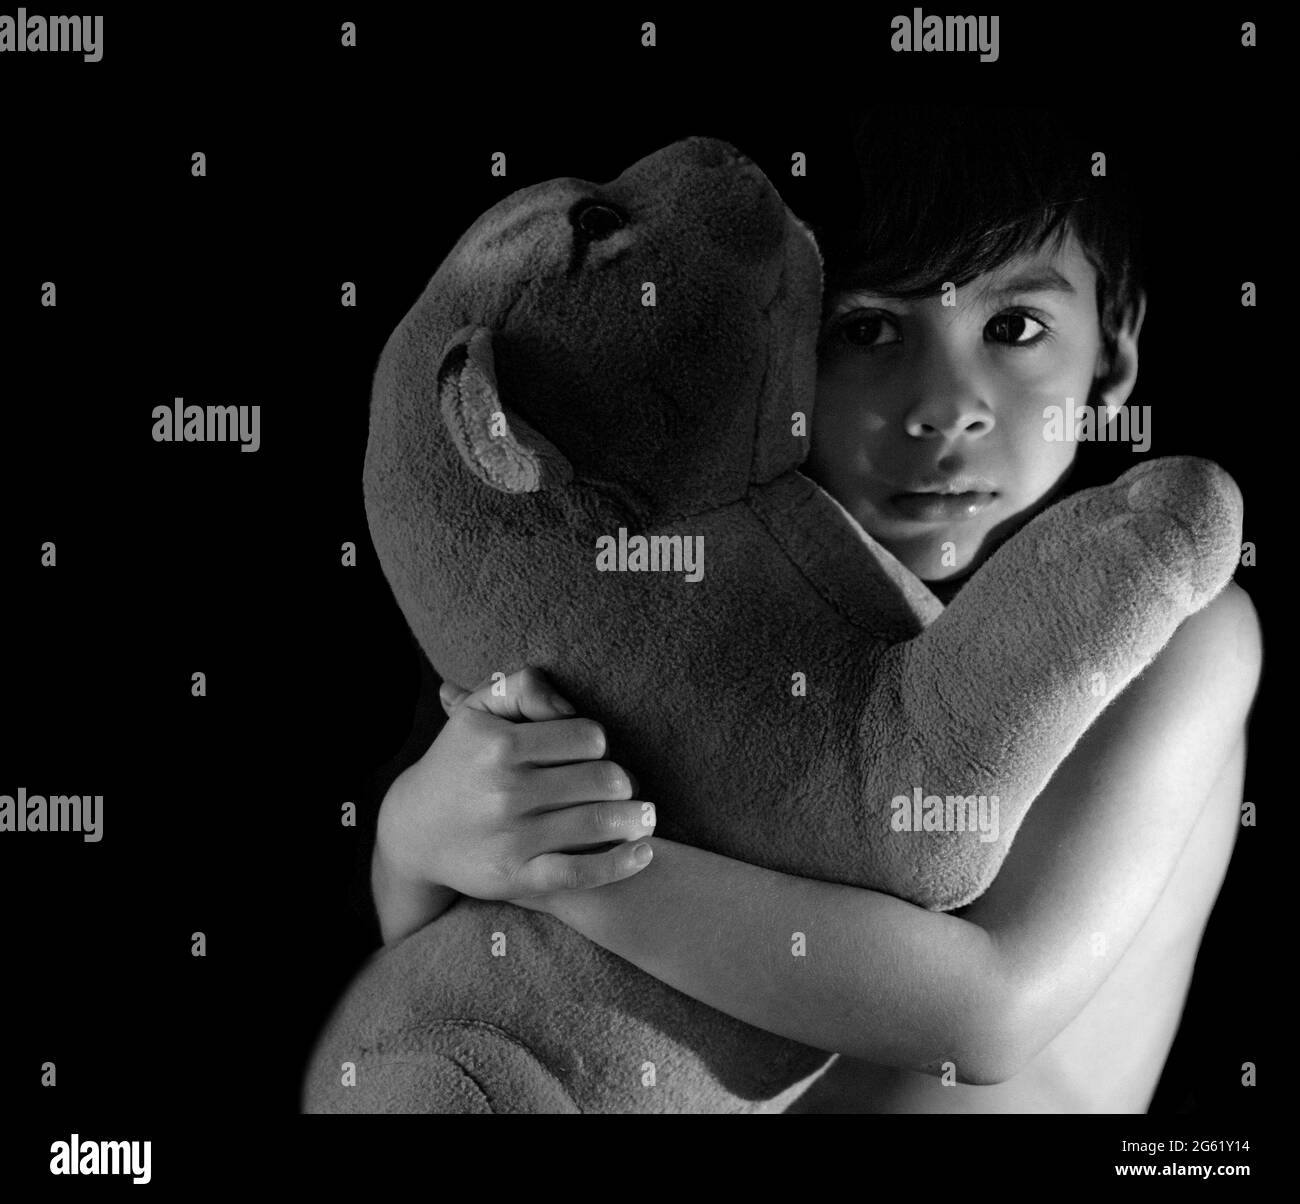 child with a sweet look hugging a stuffed tiger with black background, monochrome horizontal copy space Stock Photo